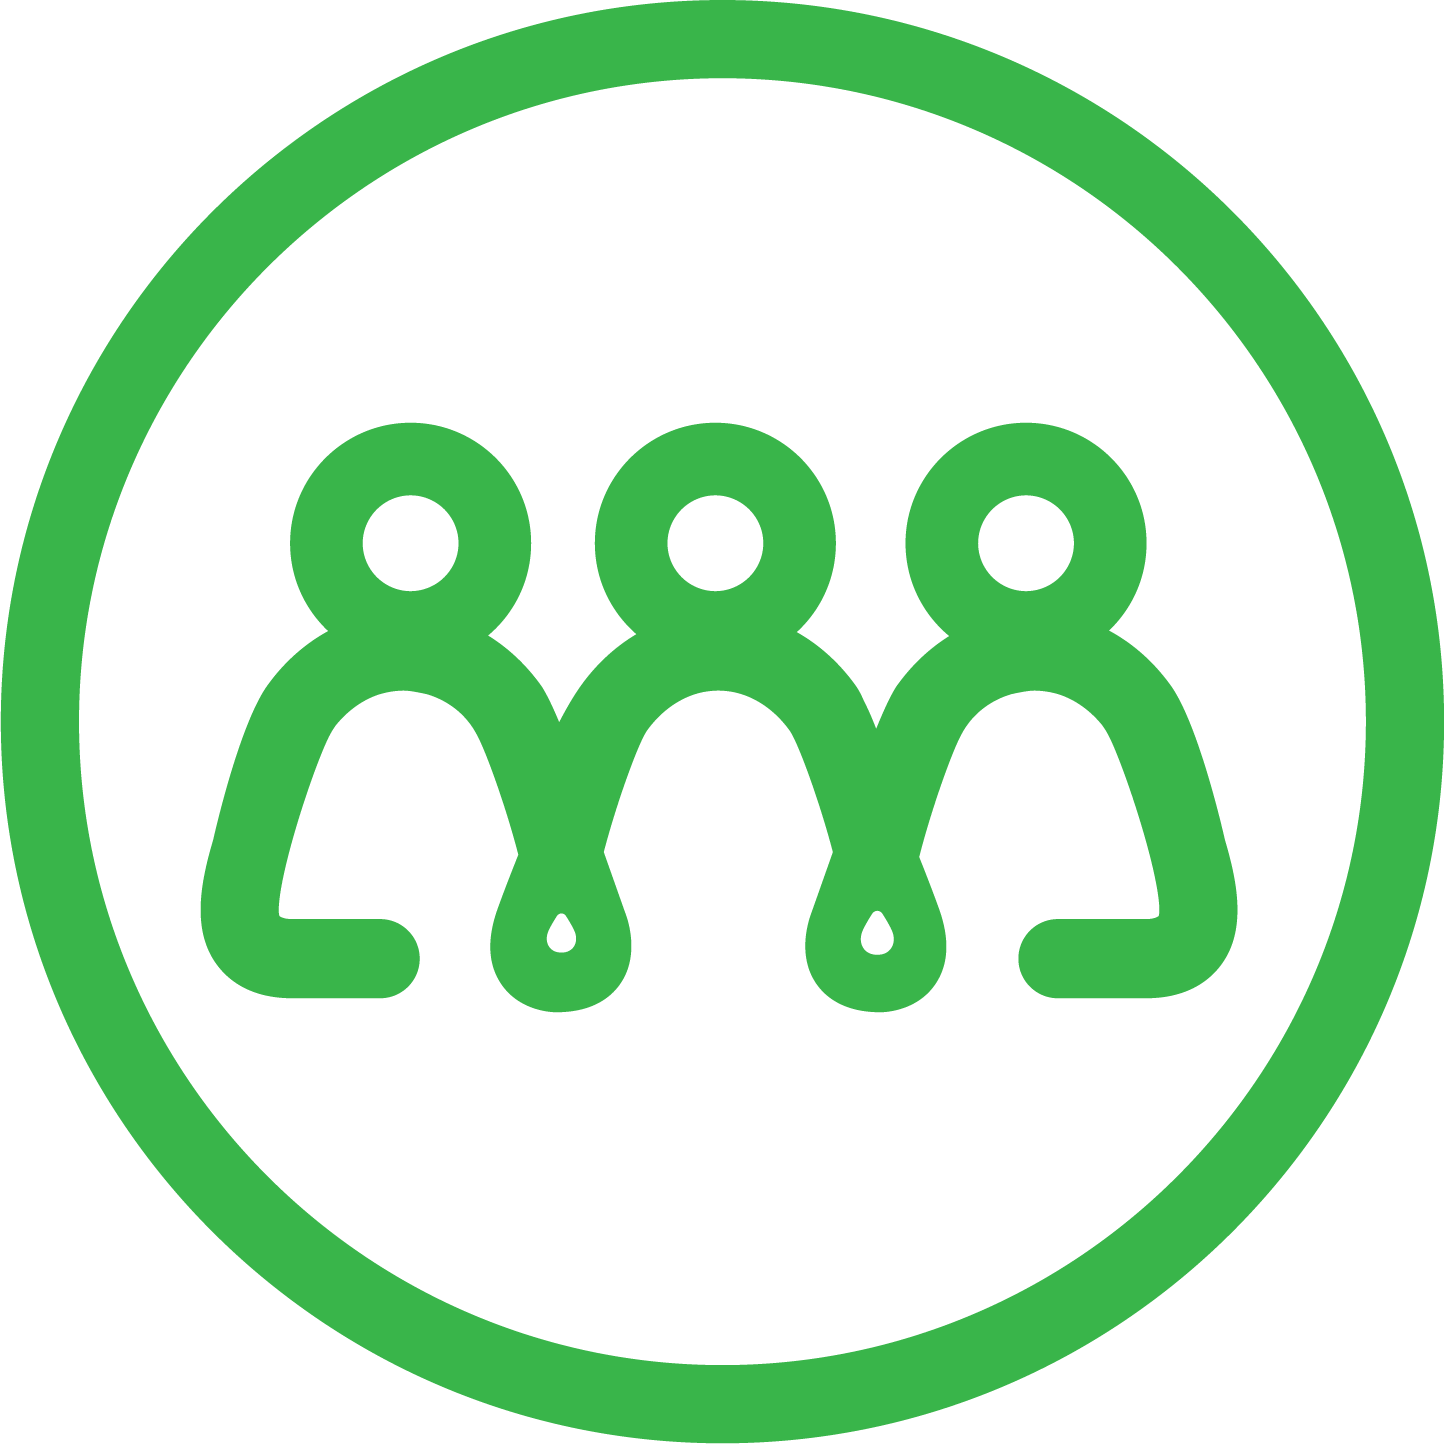 A green circle with four people in it.